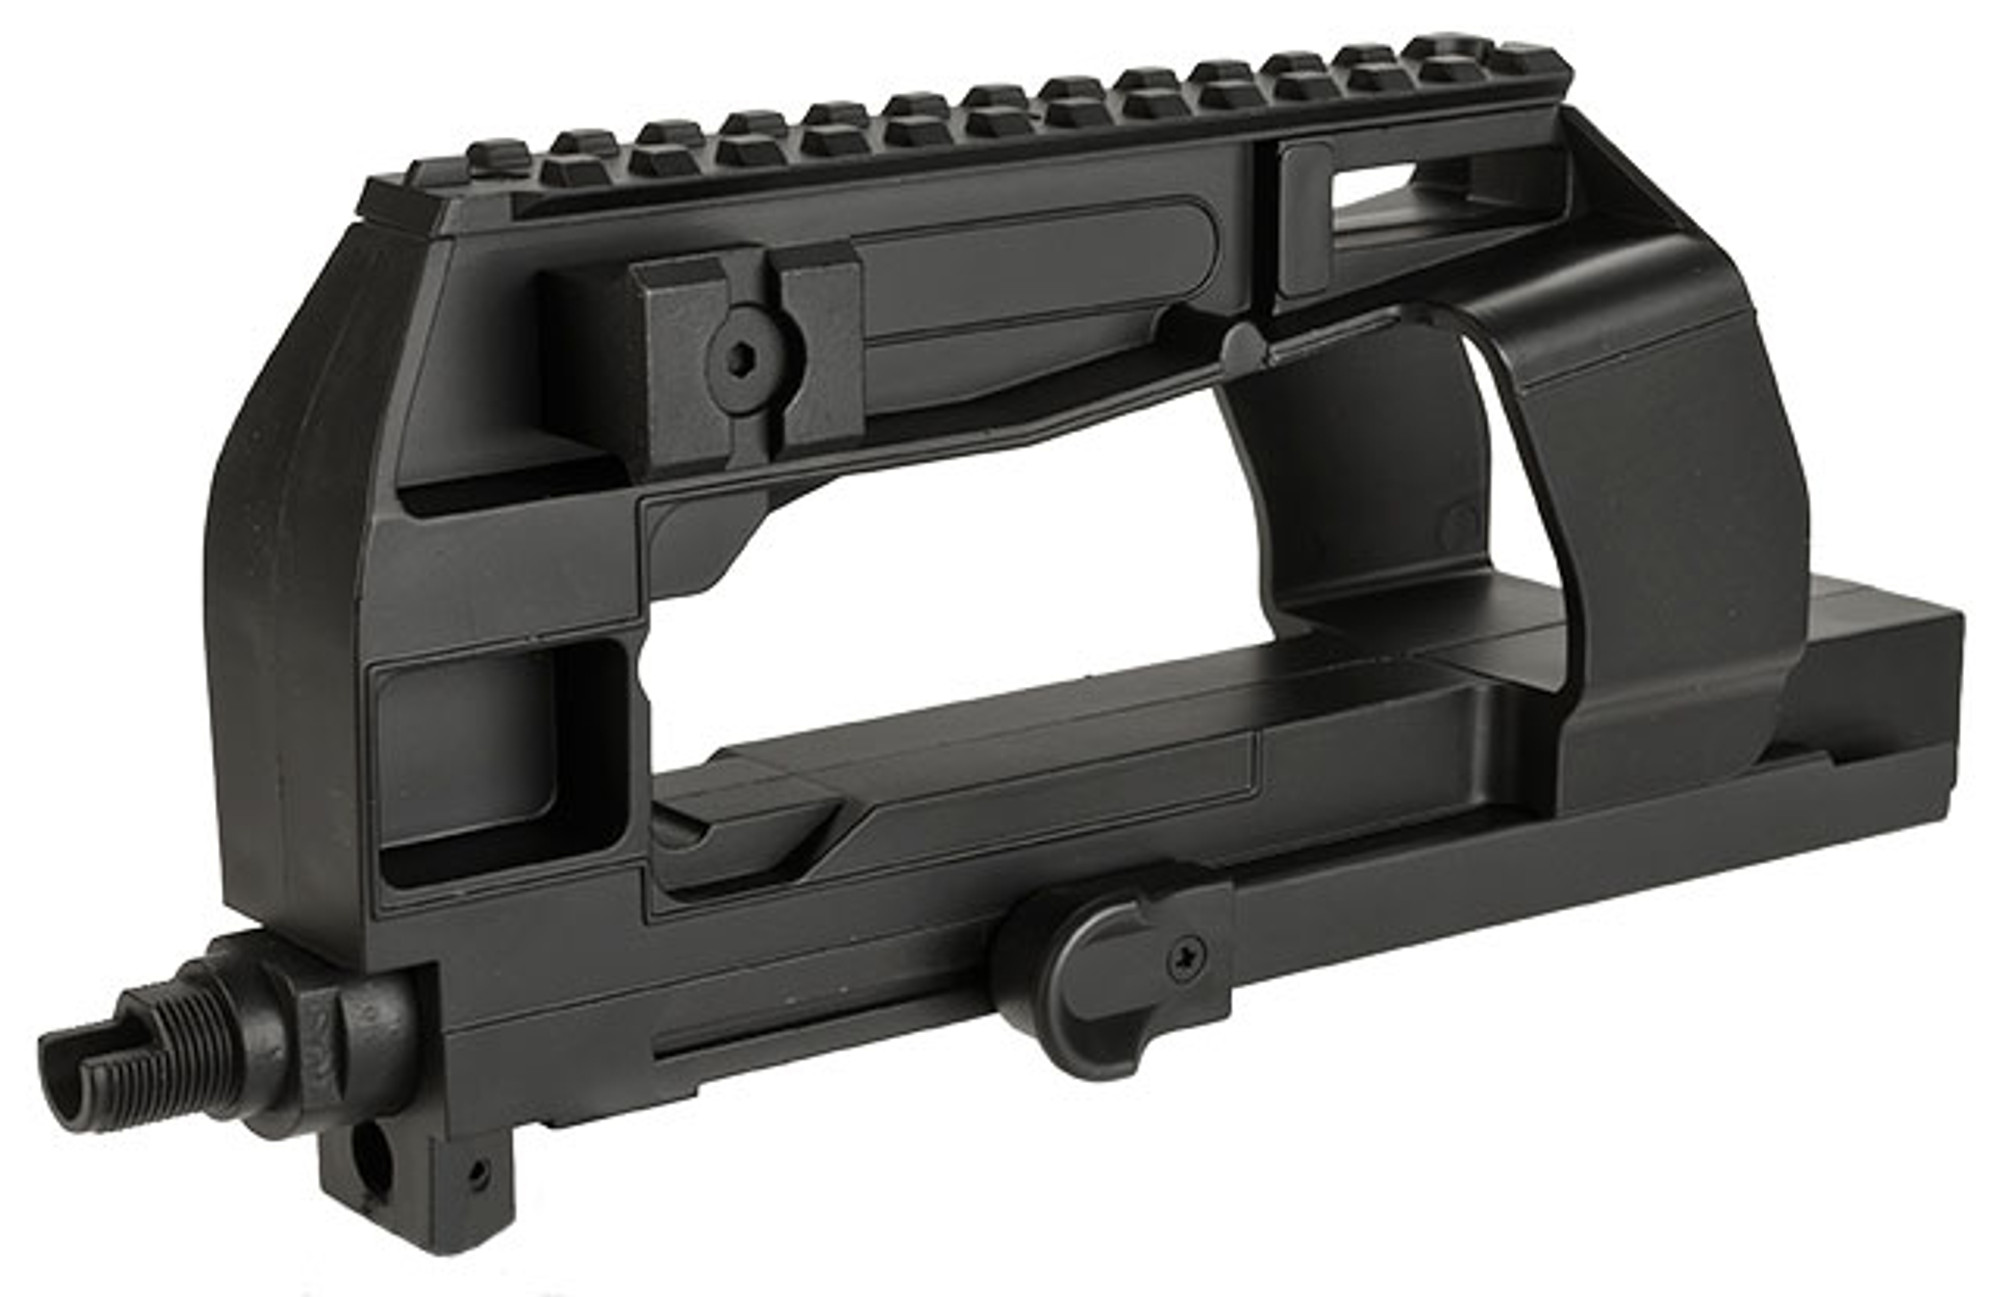 JG Metal Upper Receiver Body for P90 Series Airsoft AEGs